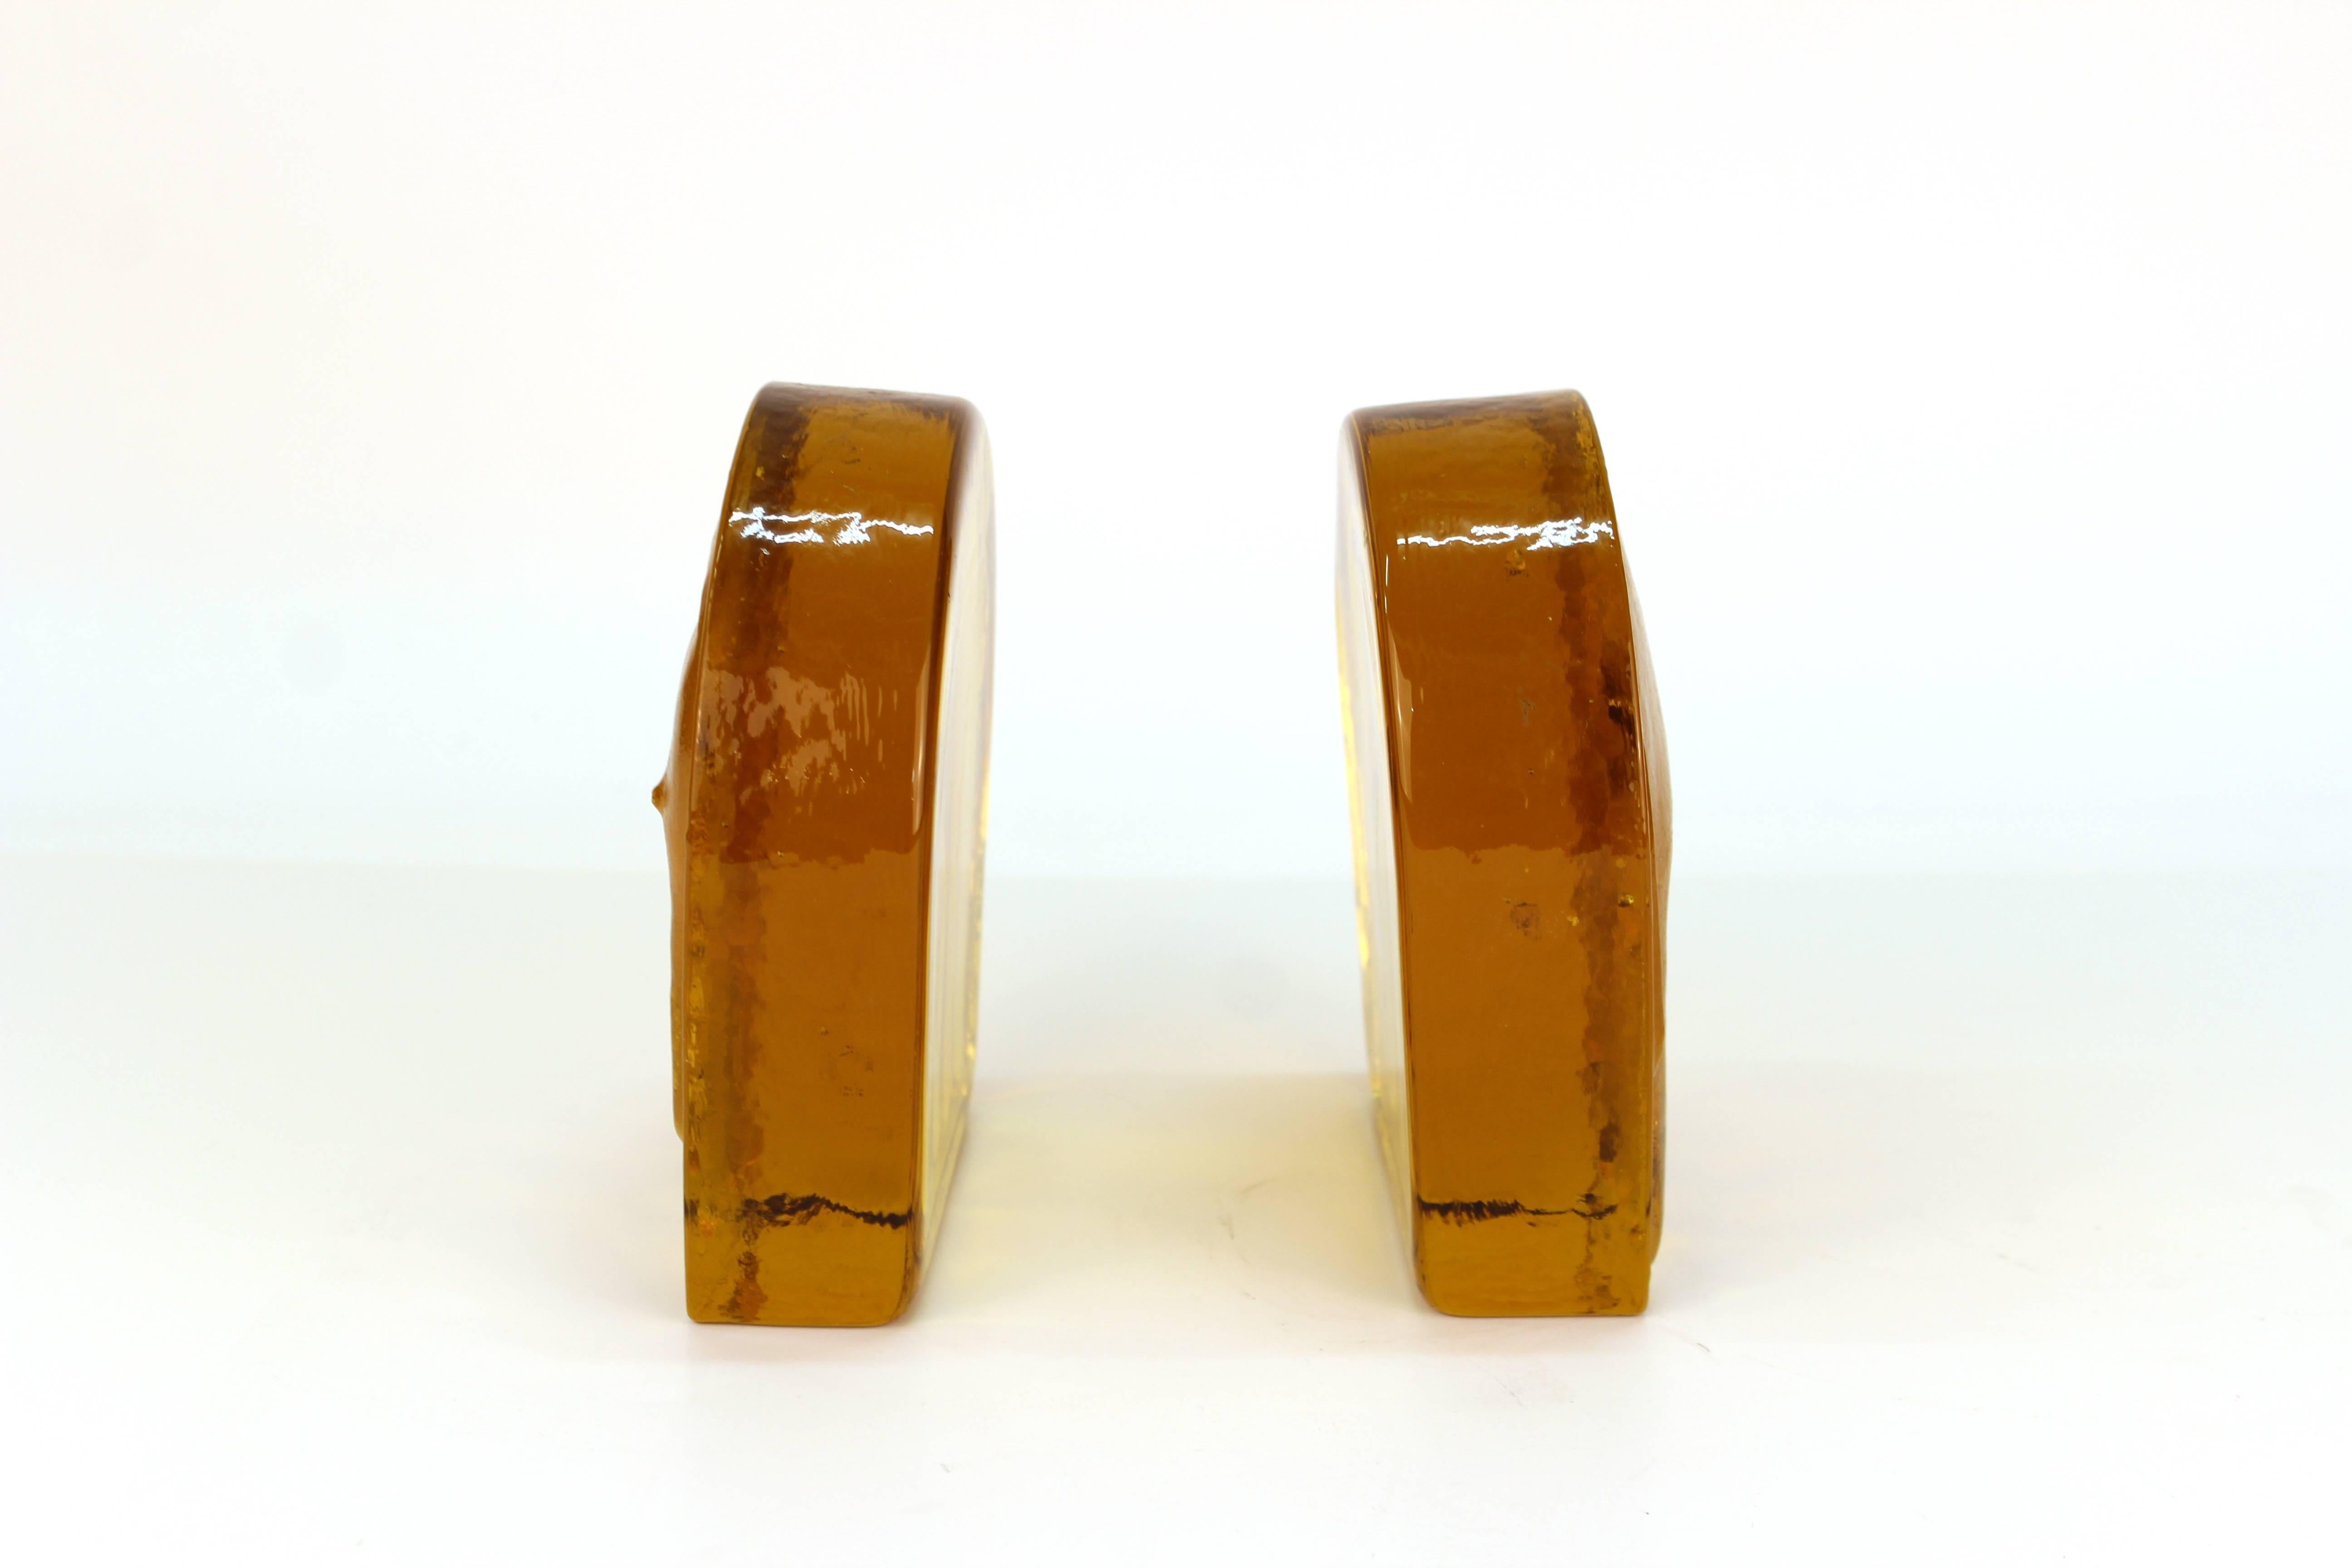 American Blenko Mid-Century Modern Glass Bookends with Elephant Motif